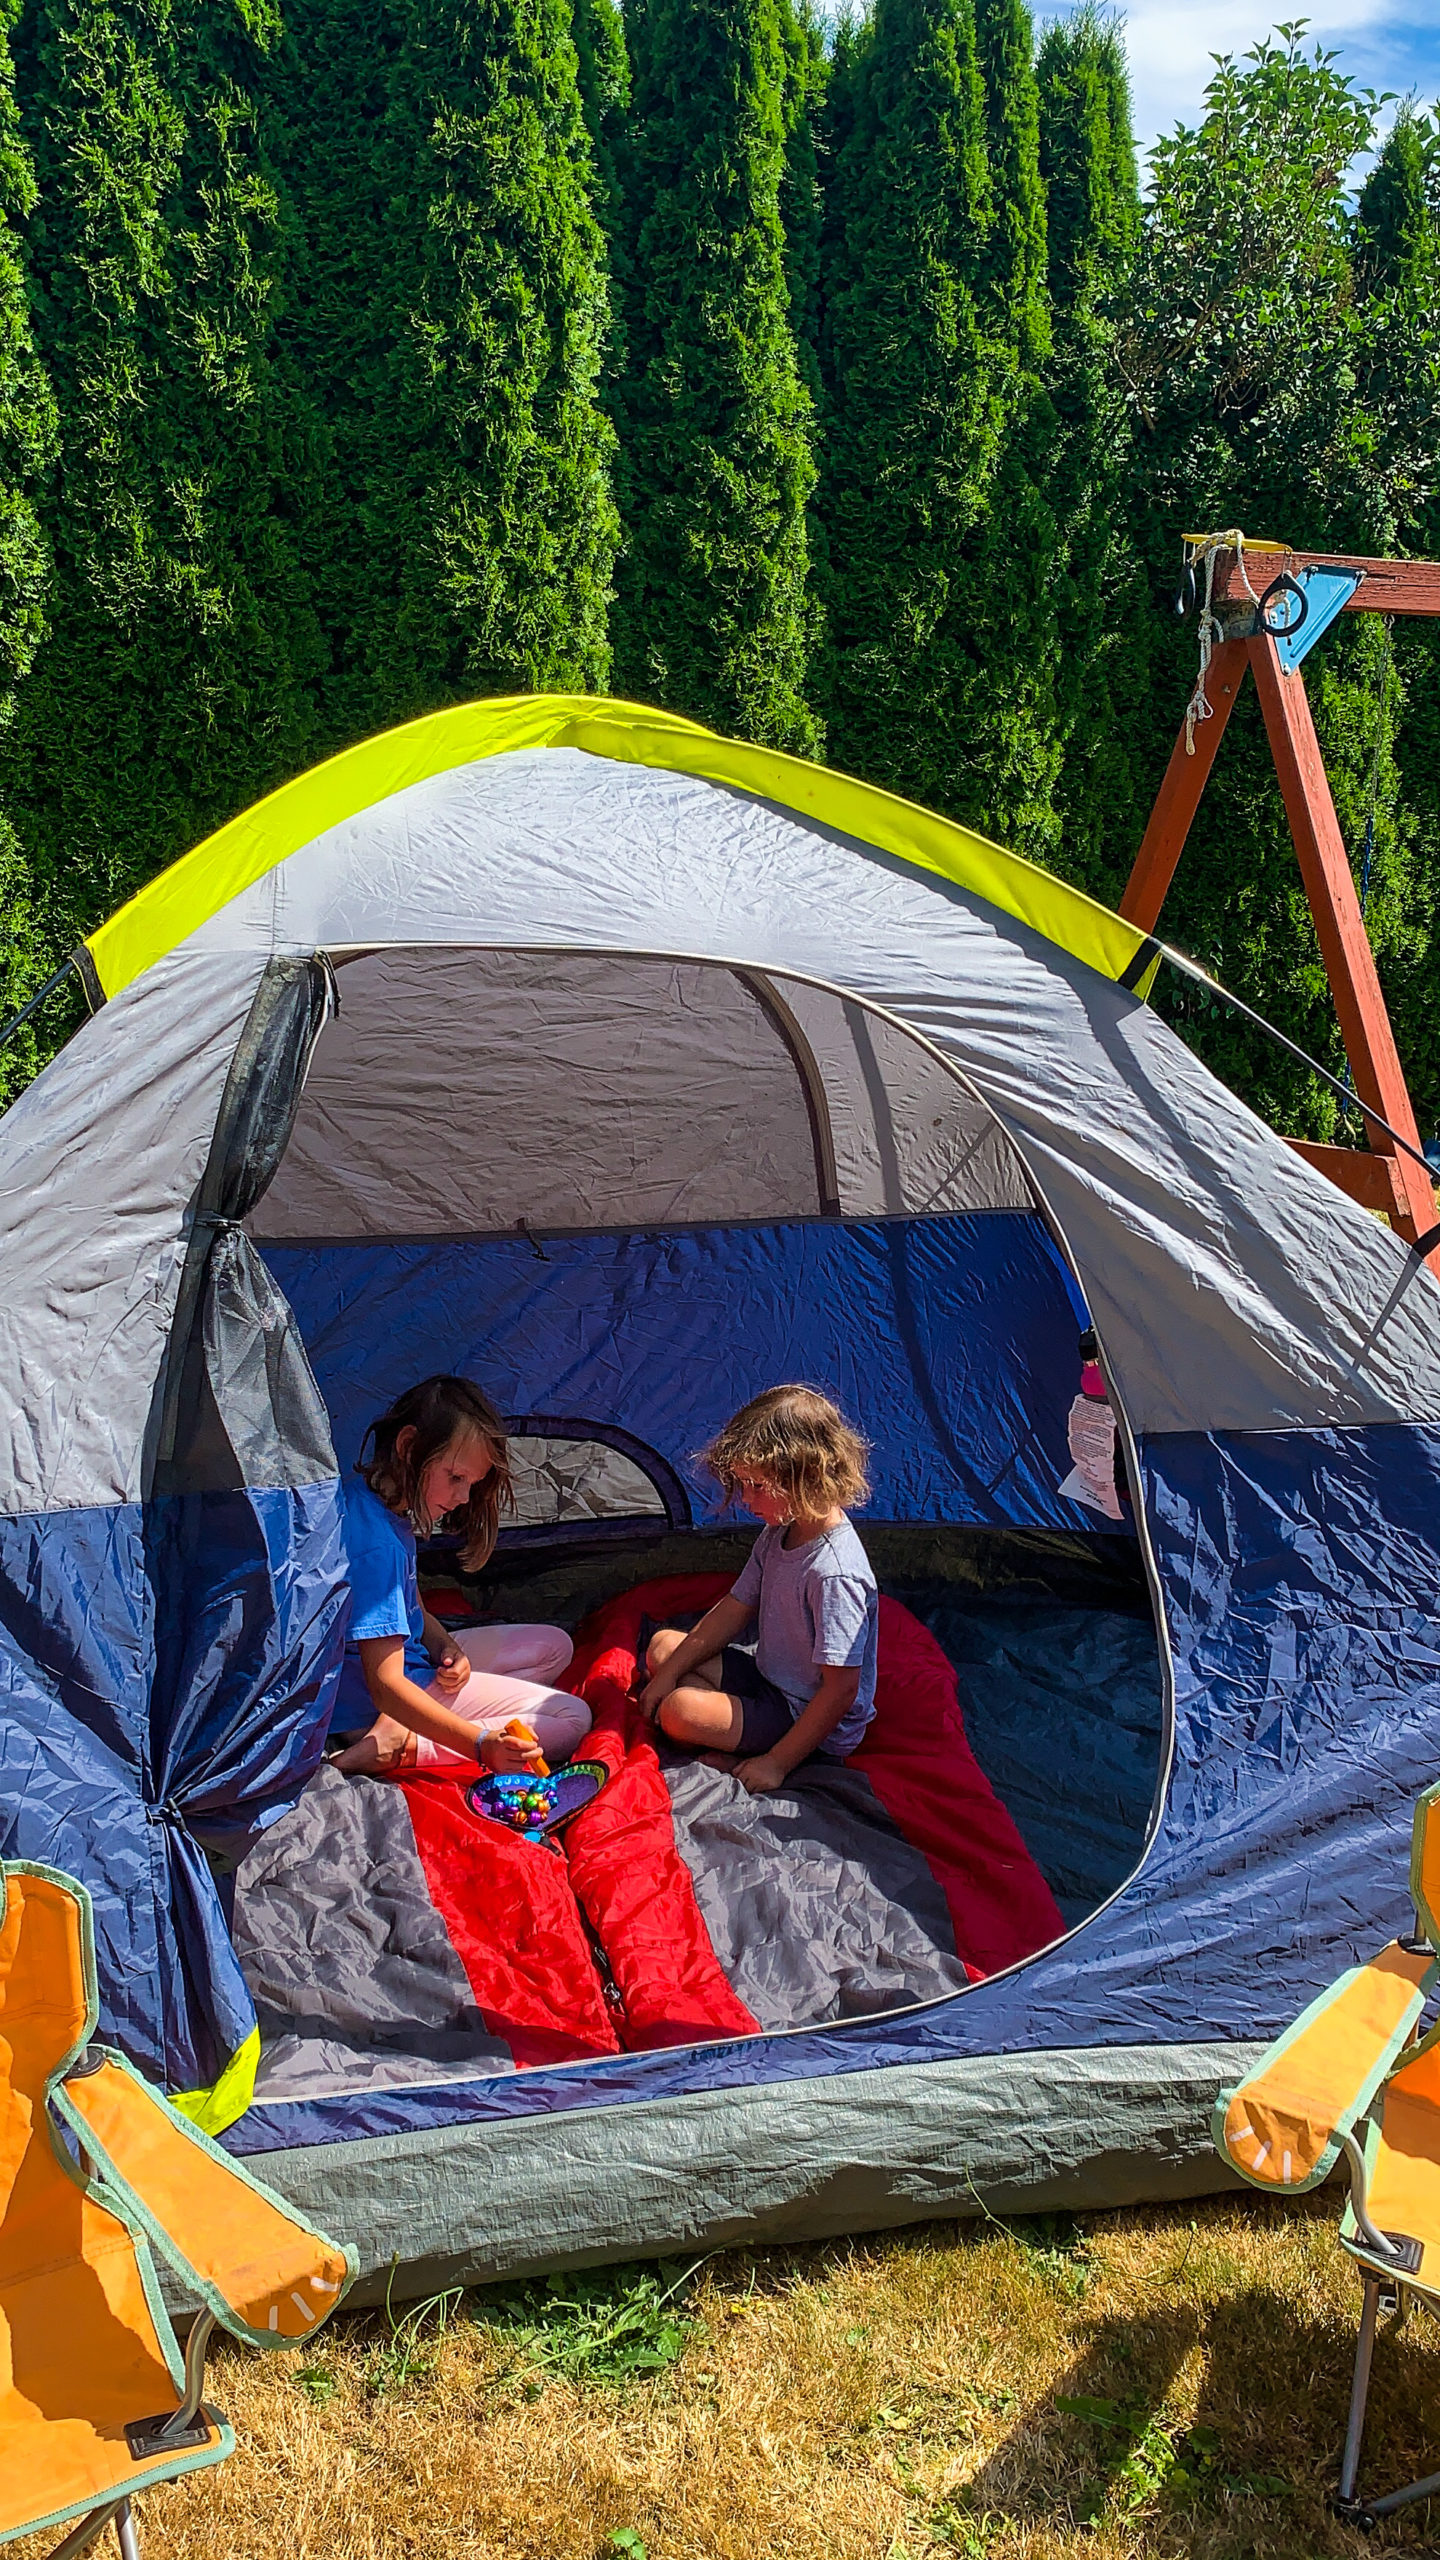 kids playing games in a backyard tent- Travel blogger Nikki Harrington shares seven ideas that will turn your backyard into the ultimate (easy) family camping adventure!